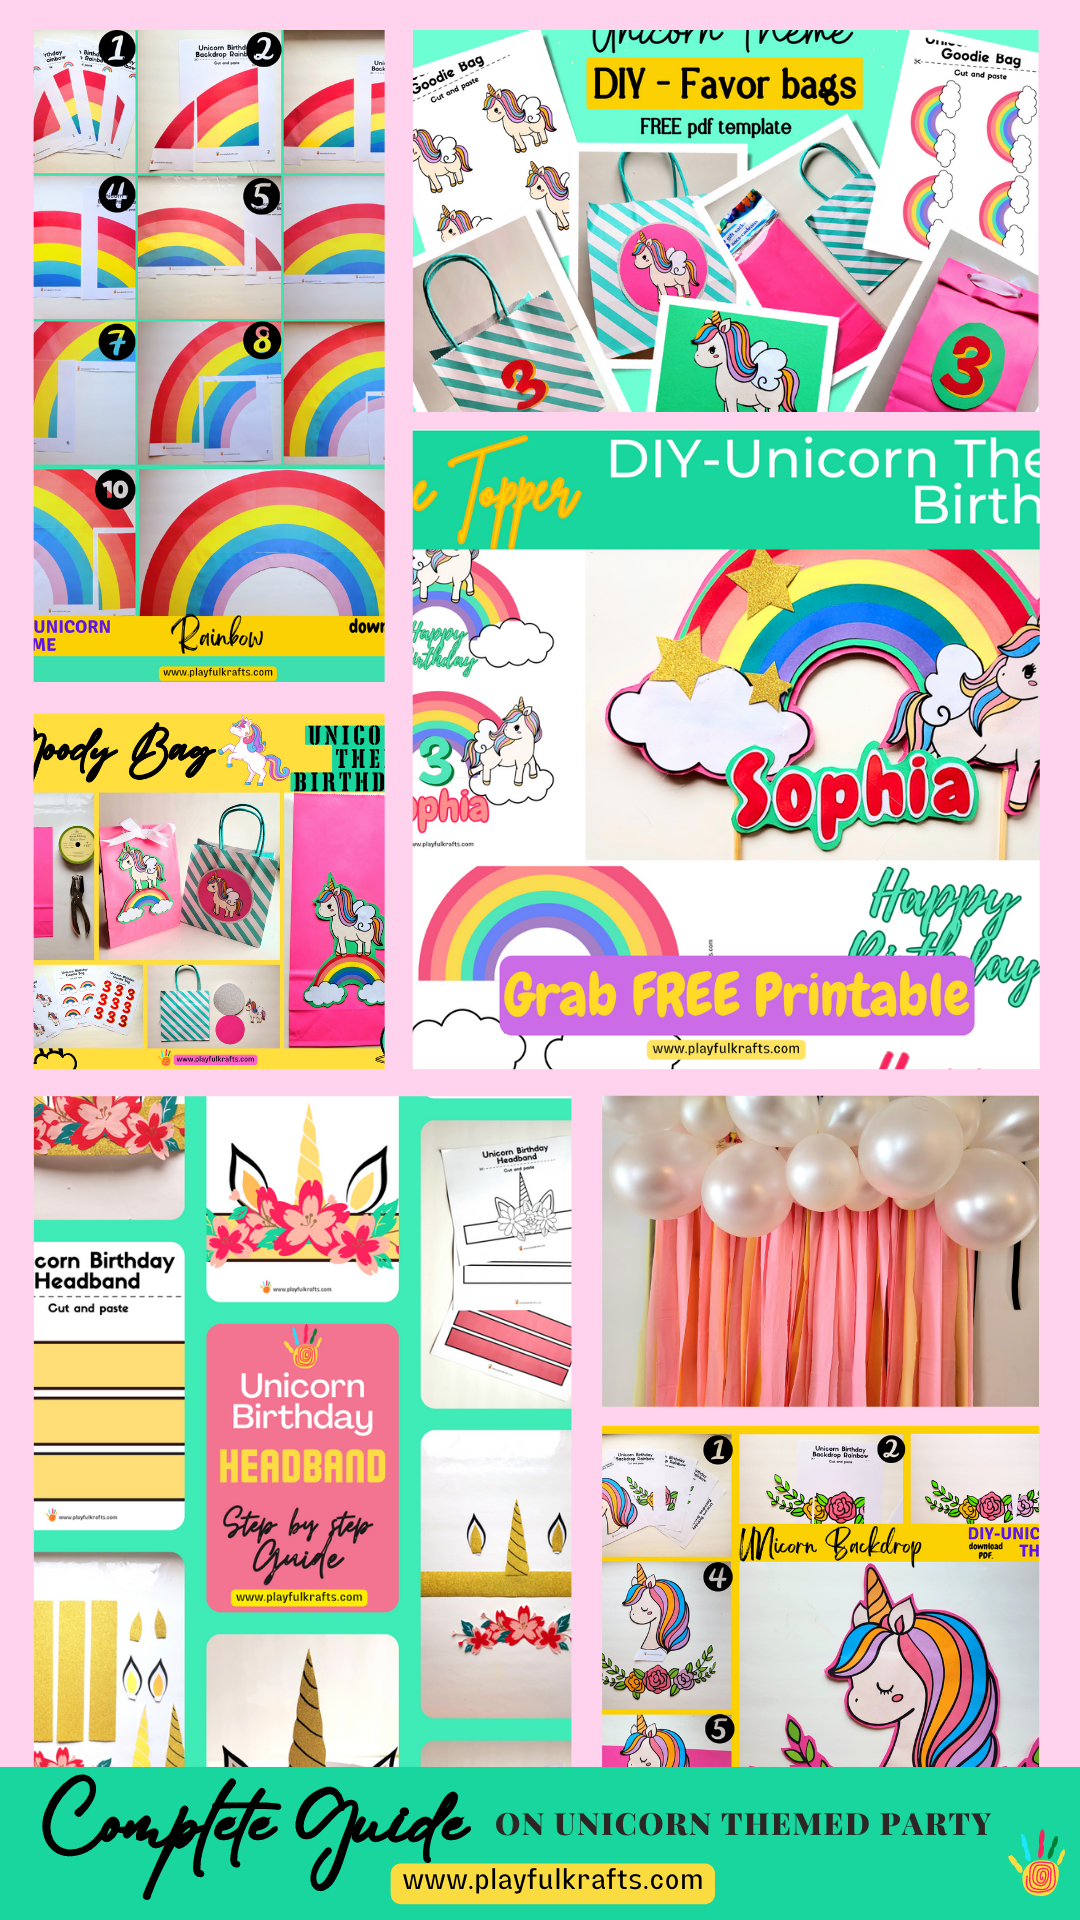 Complete-guide-for-a-unicorn-themed-birthday-party-free-templates